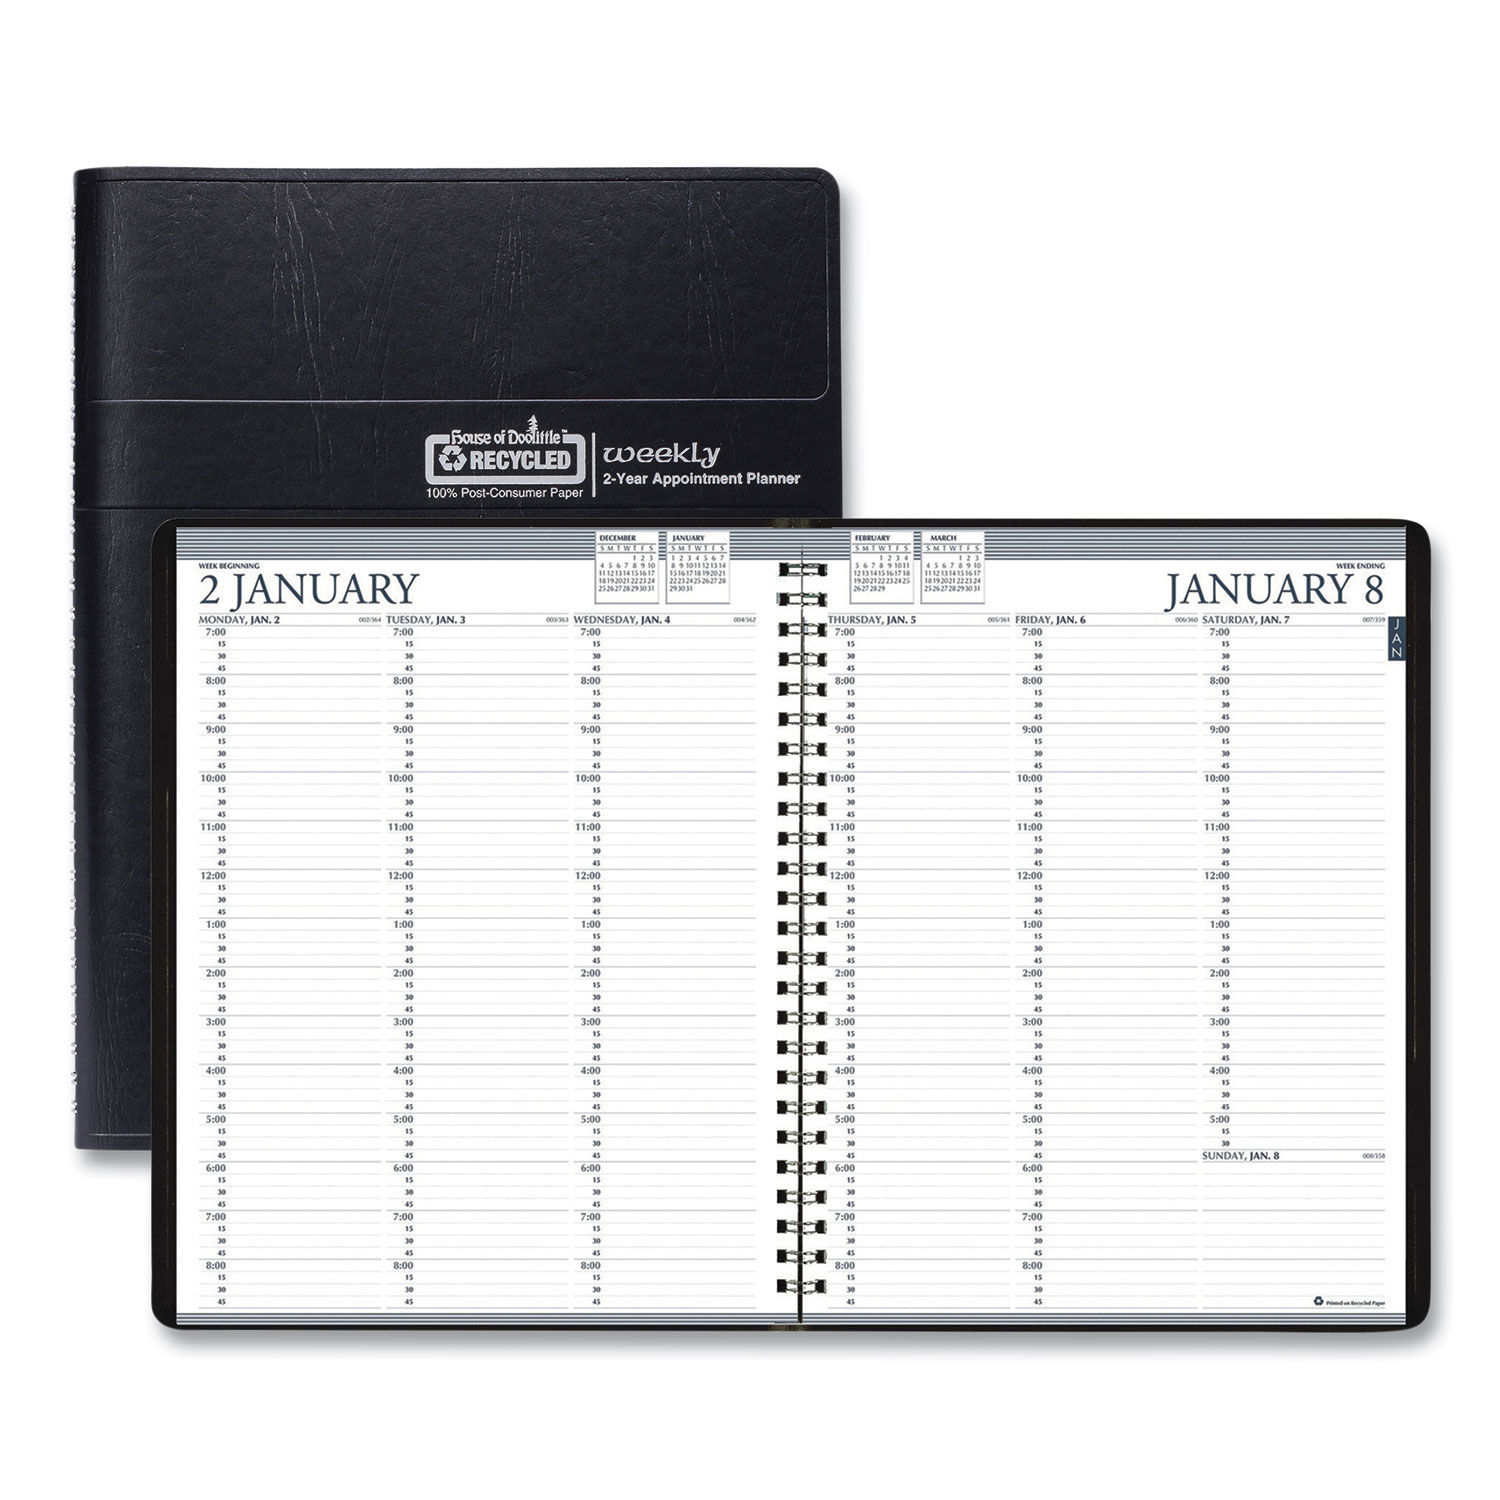 Recycled Professional Weekly Planner by House of Doolittle™ HOD272002 